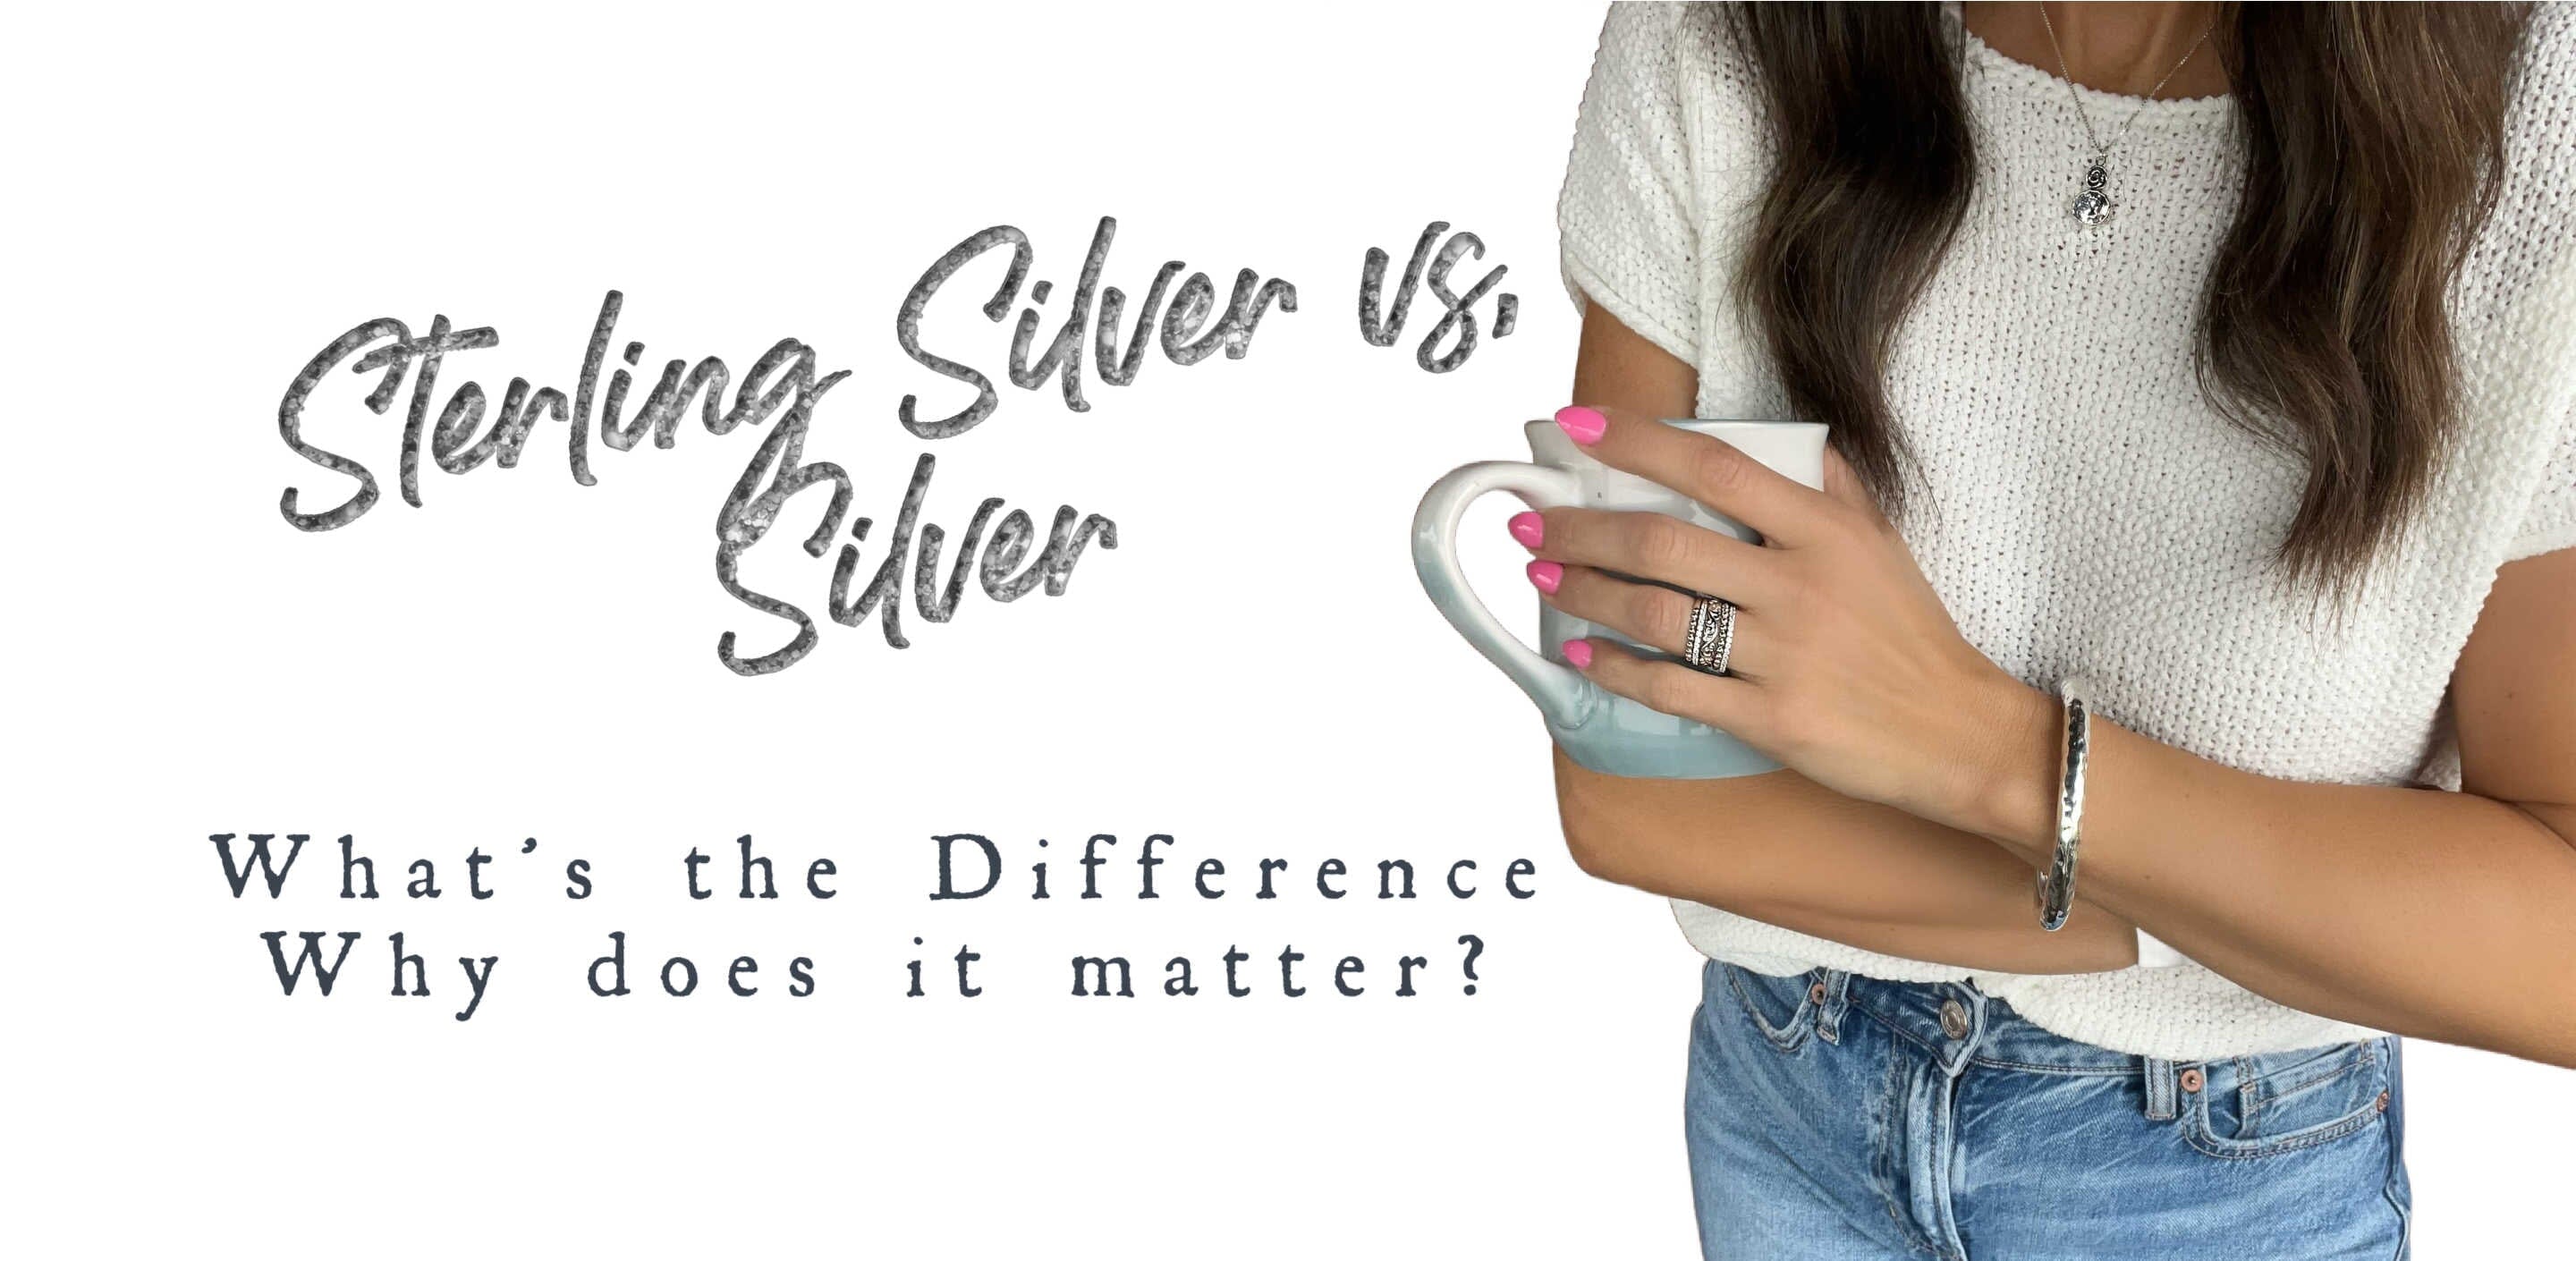 What is sterling silver jewelry and how is it different from silver jewelry?